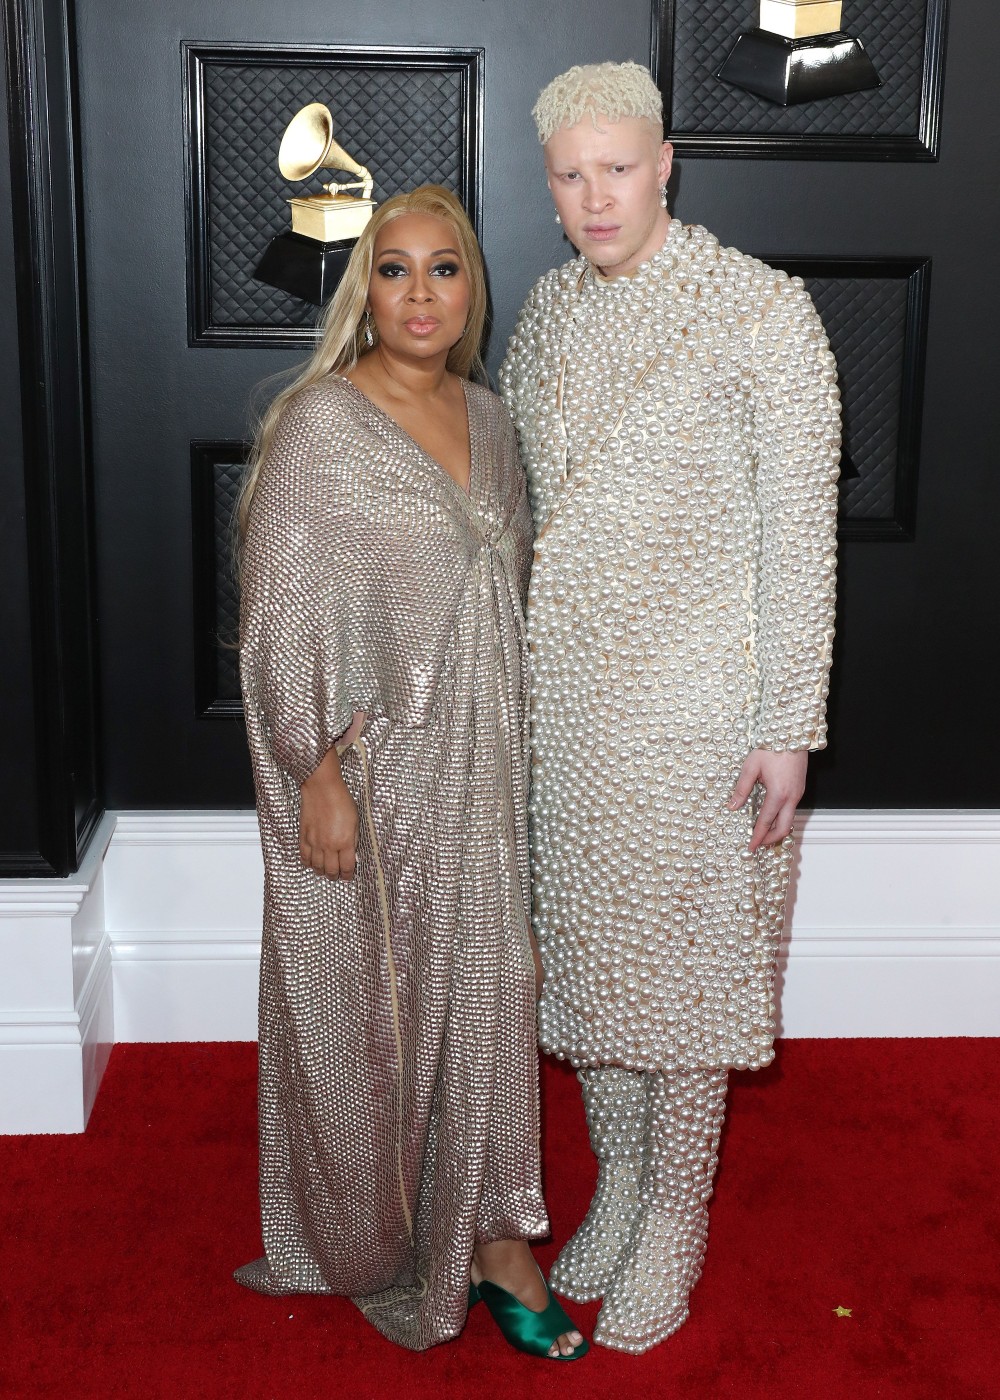 Geraldine Ross and Shaun Ross arrive at the 62nd Annual GRAMMY Awards held at Staples Center on January 26, 2020 in Los Angeles, California, United States.